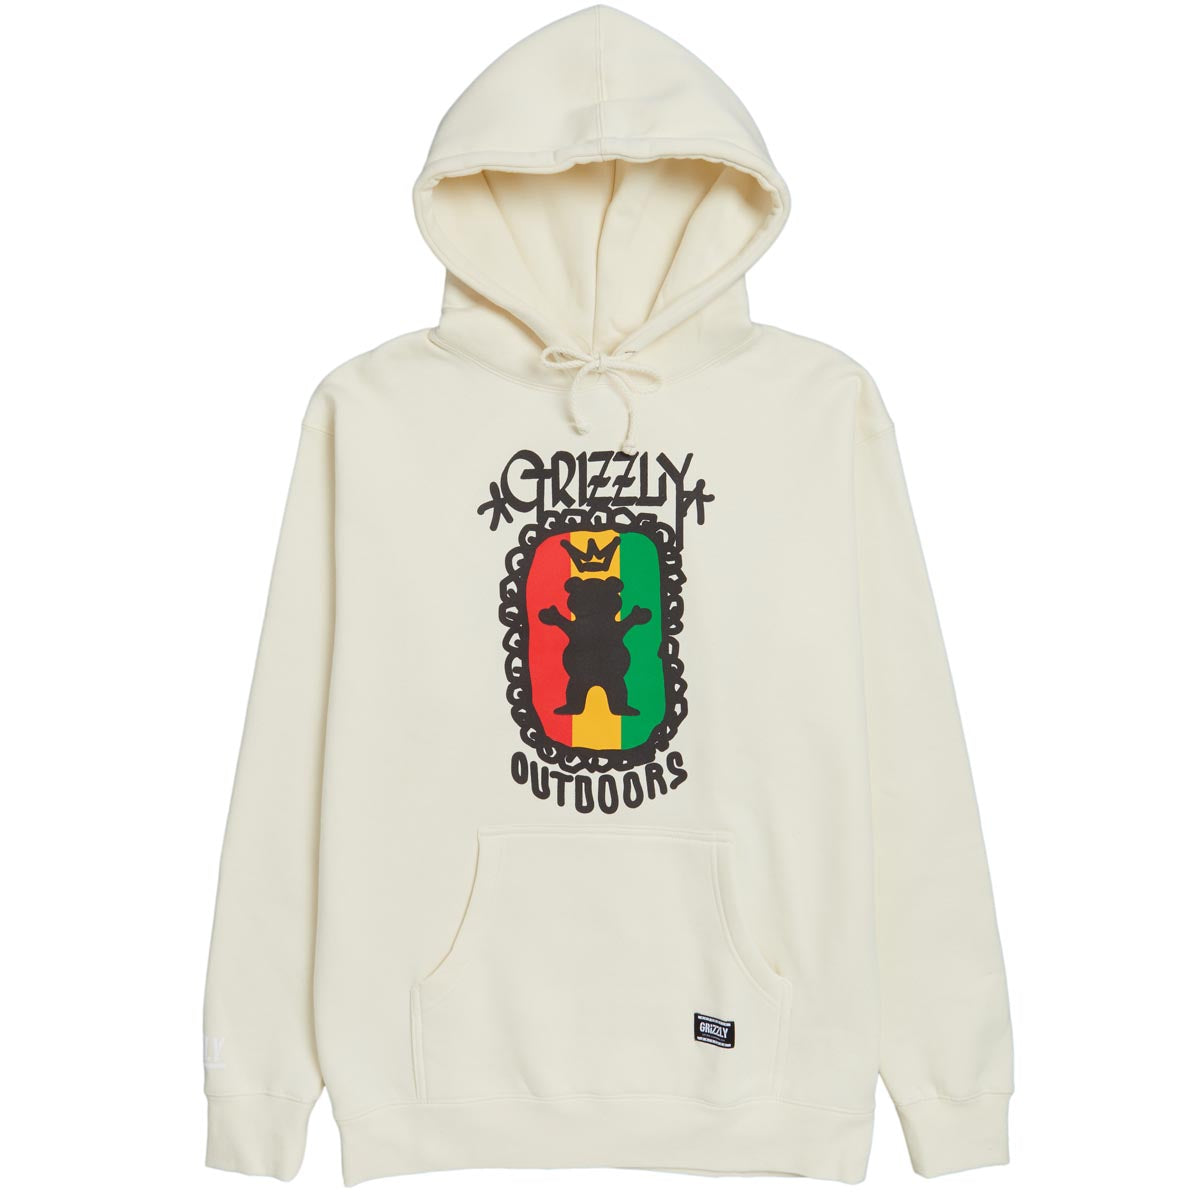 Grizzly Most High Hoodie - Bone image 1